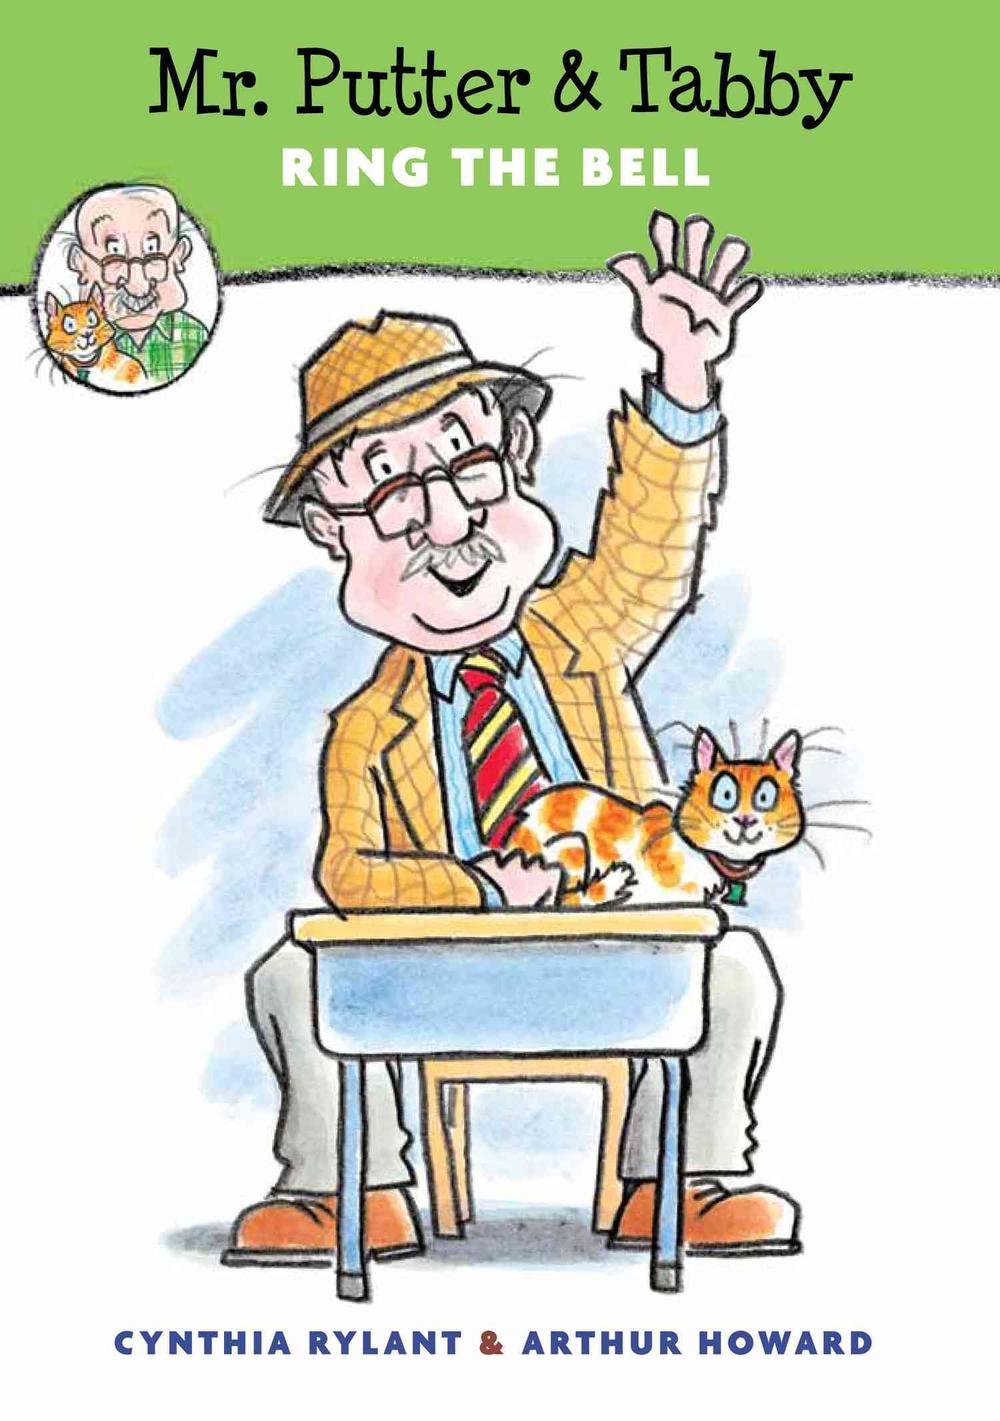 mr putter and tabby first book